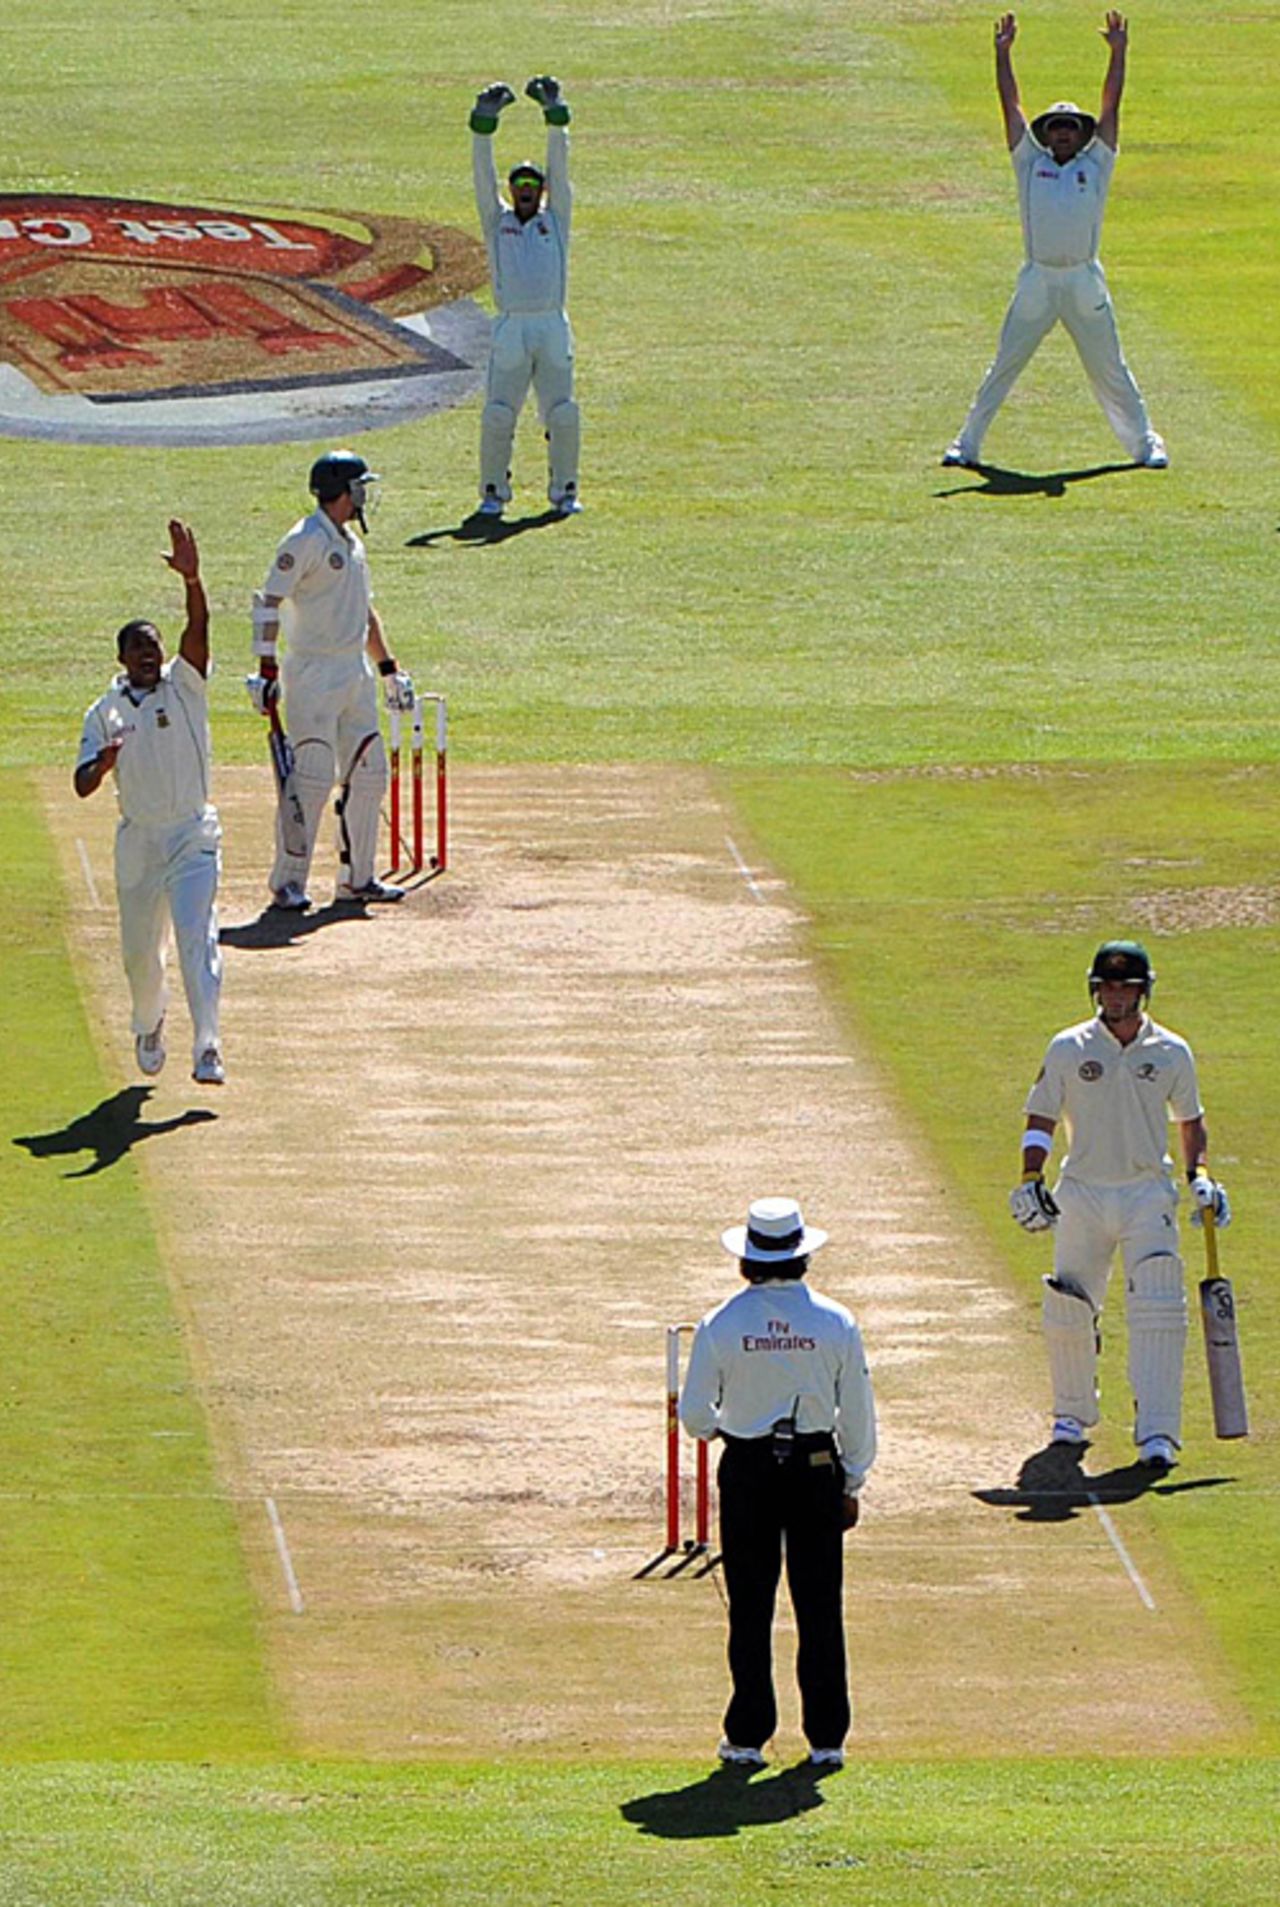 Makhaya Ntini appeals in vain for Simon Katich's wicket, South Africa v Australia, 3rd Test, 1st day, Cape Town, March 19, 2009